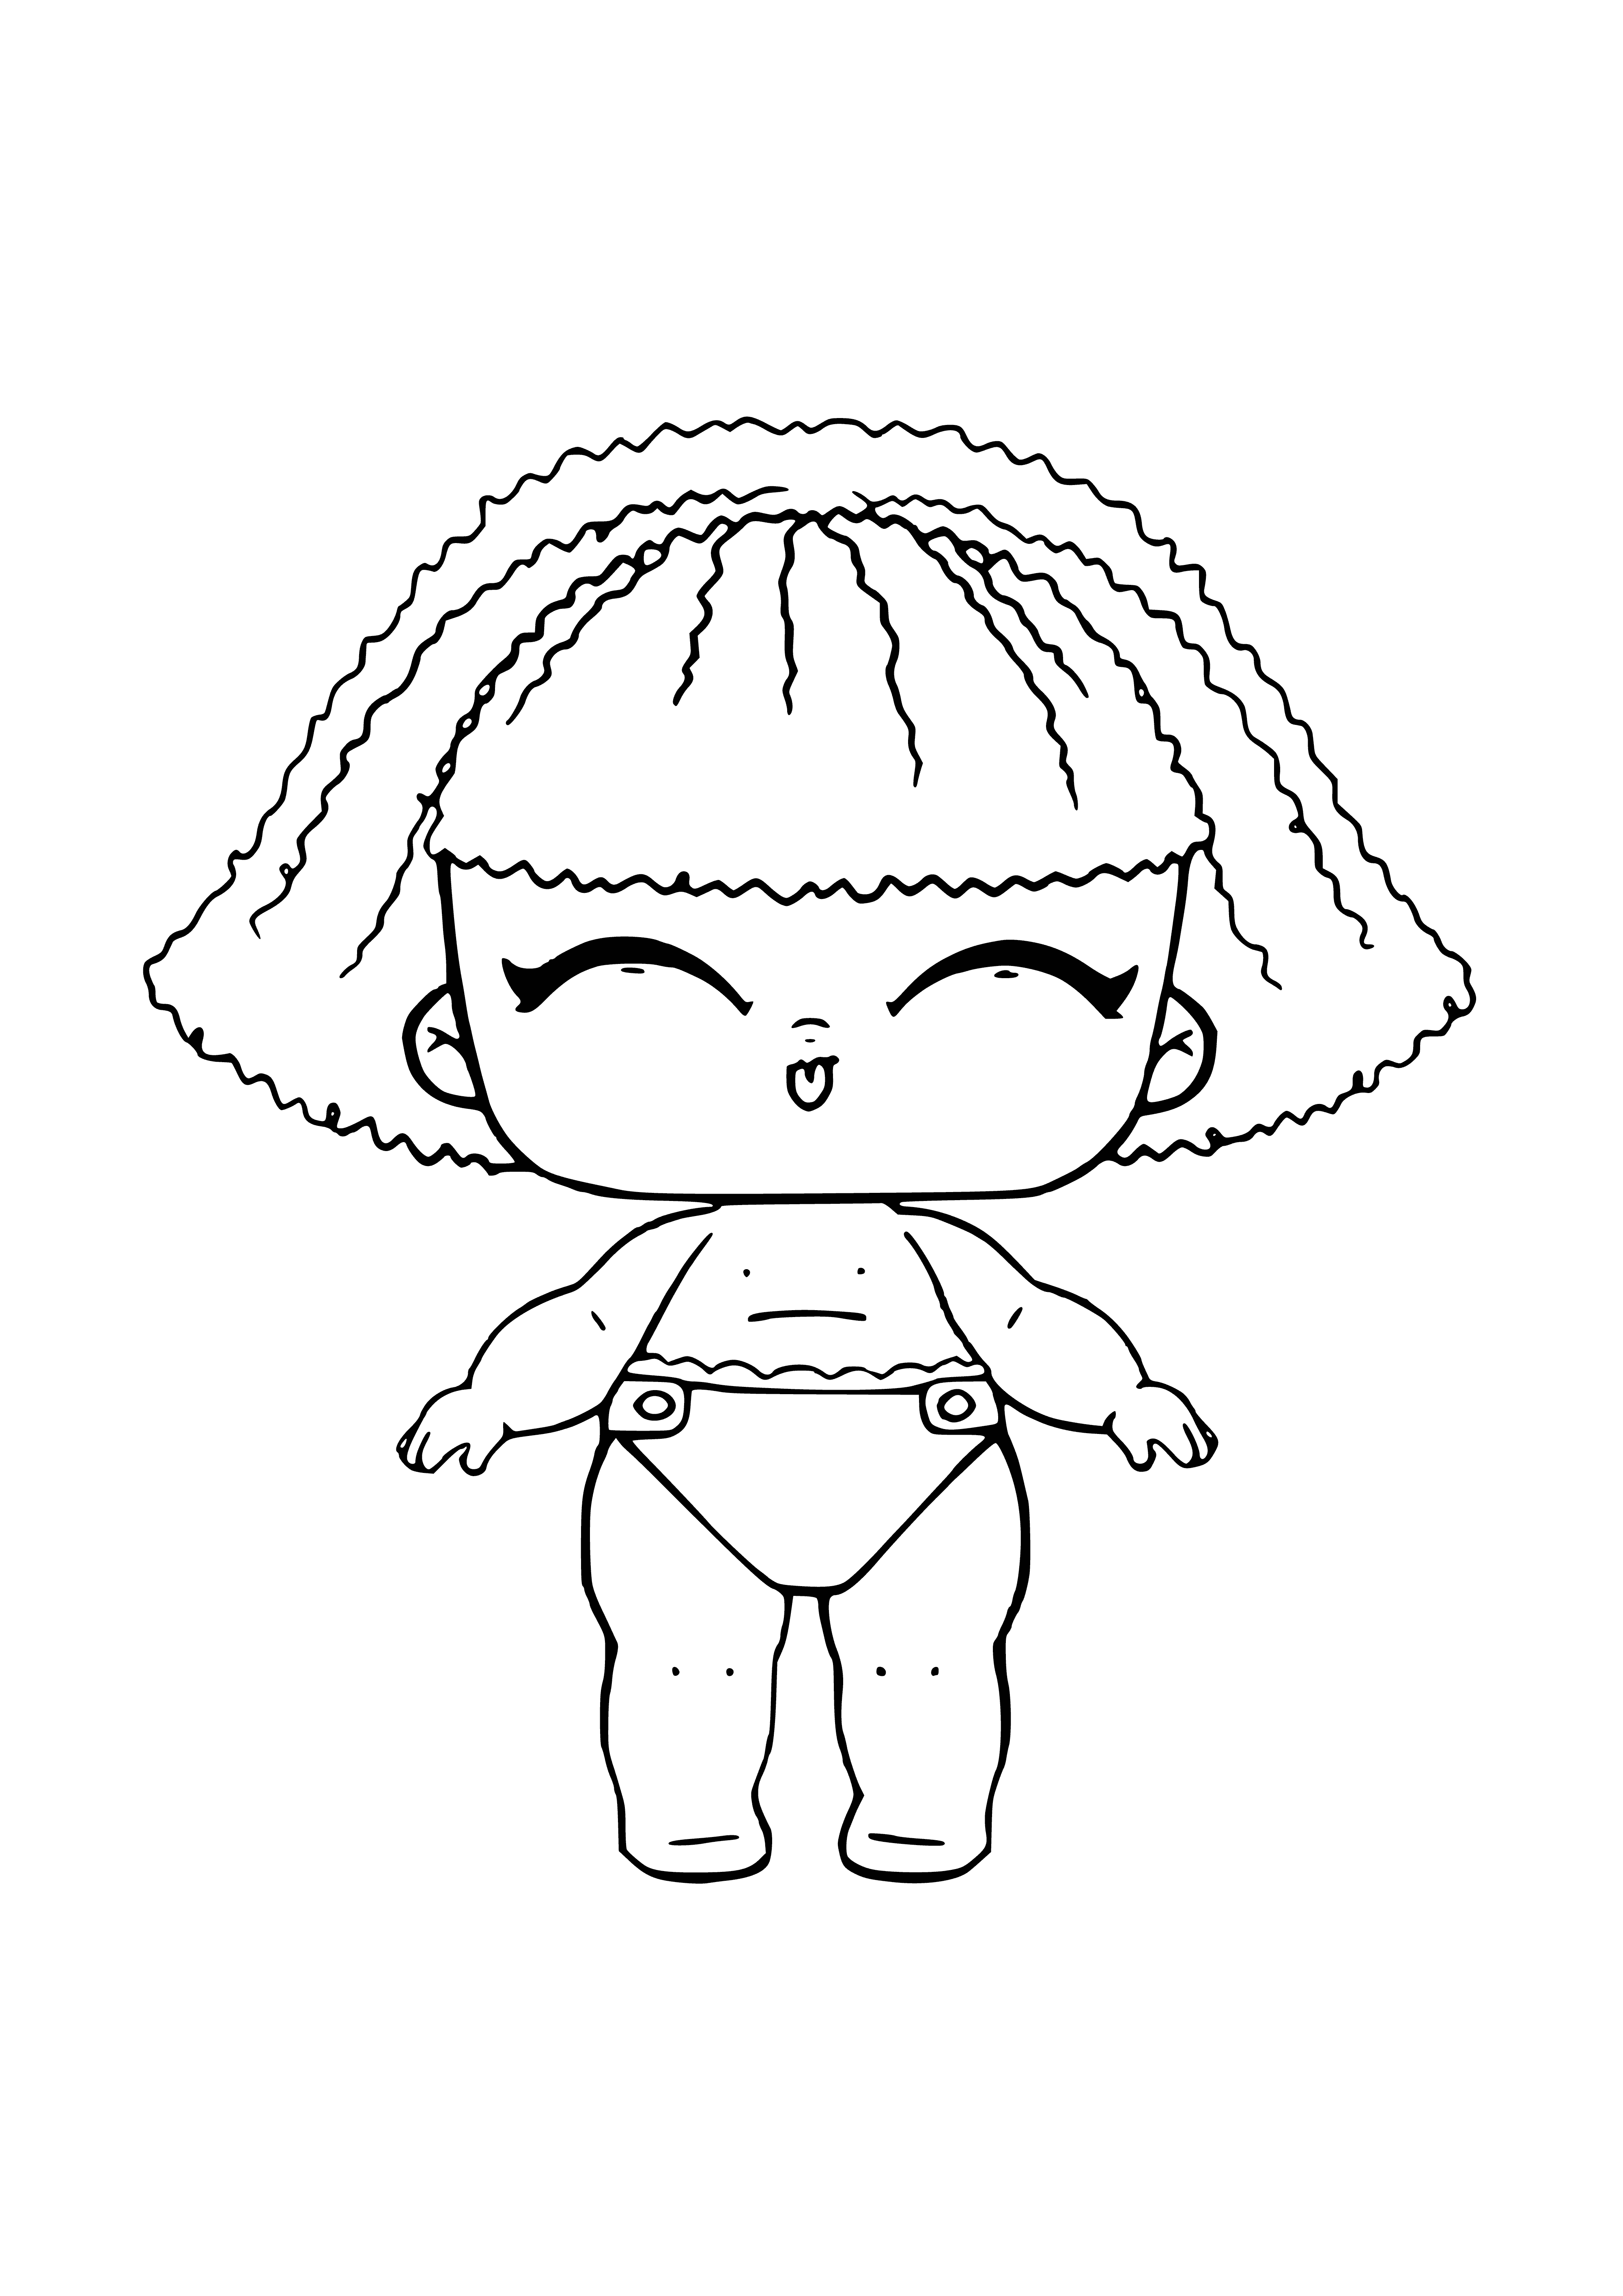 coloring page: Sleeping baby in center of coloring page; large silver star-shaped sequin on left surrounded by small sequins.